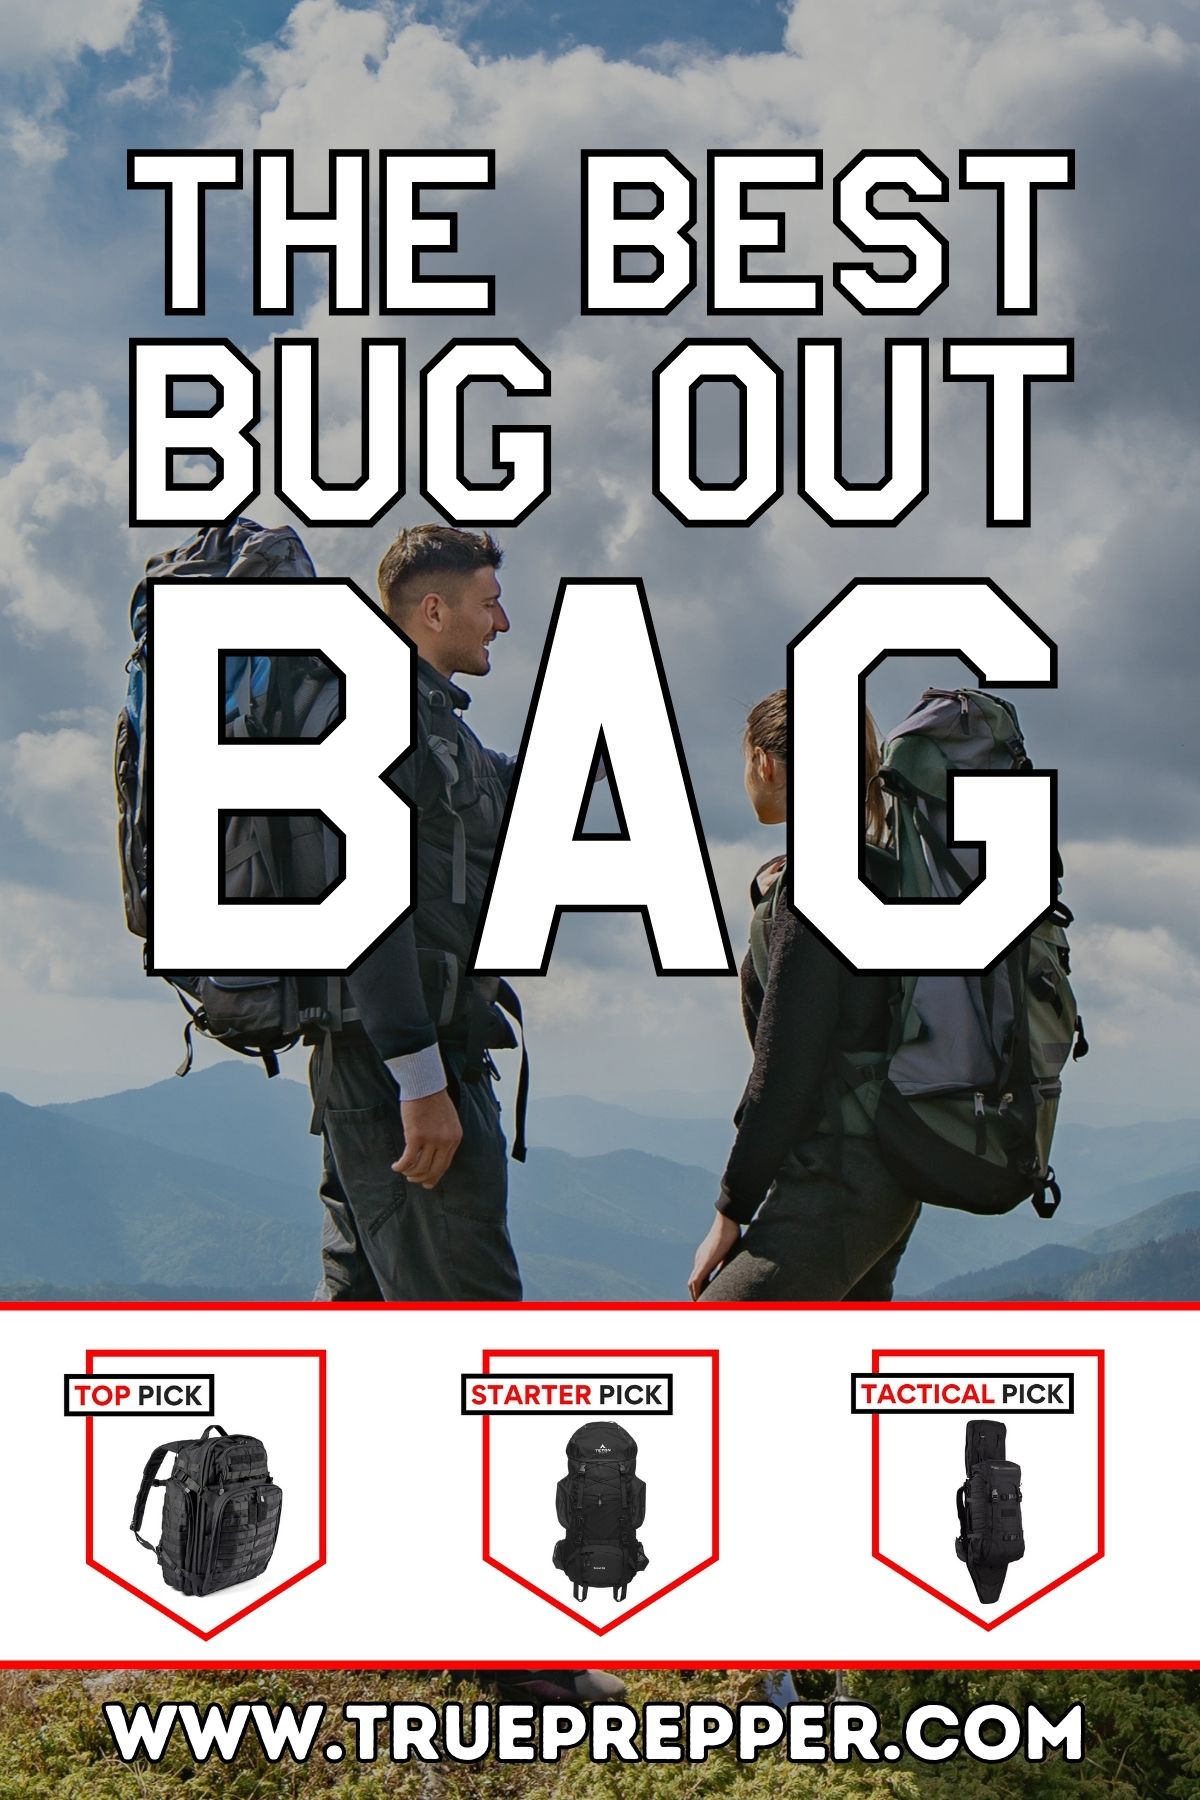 The Best Bug Out Bag